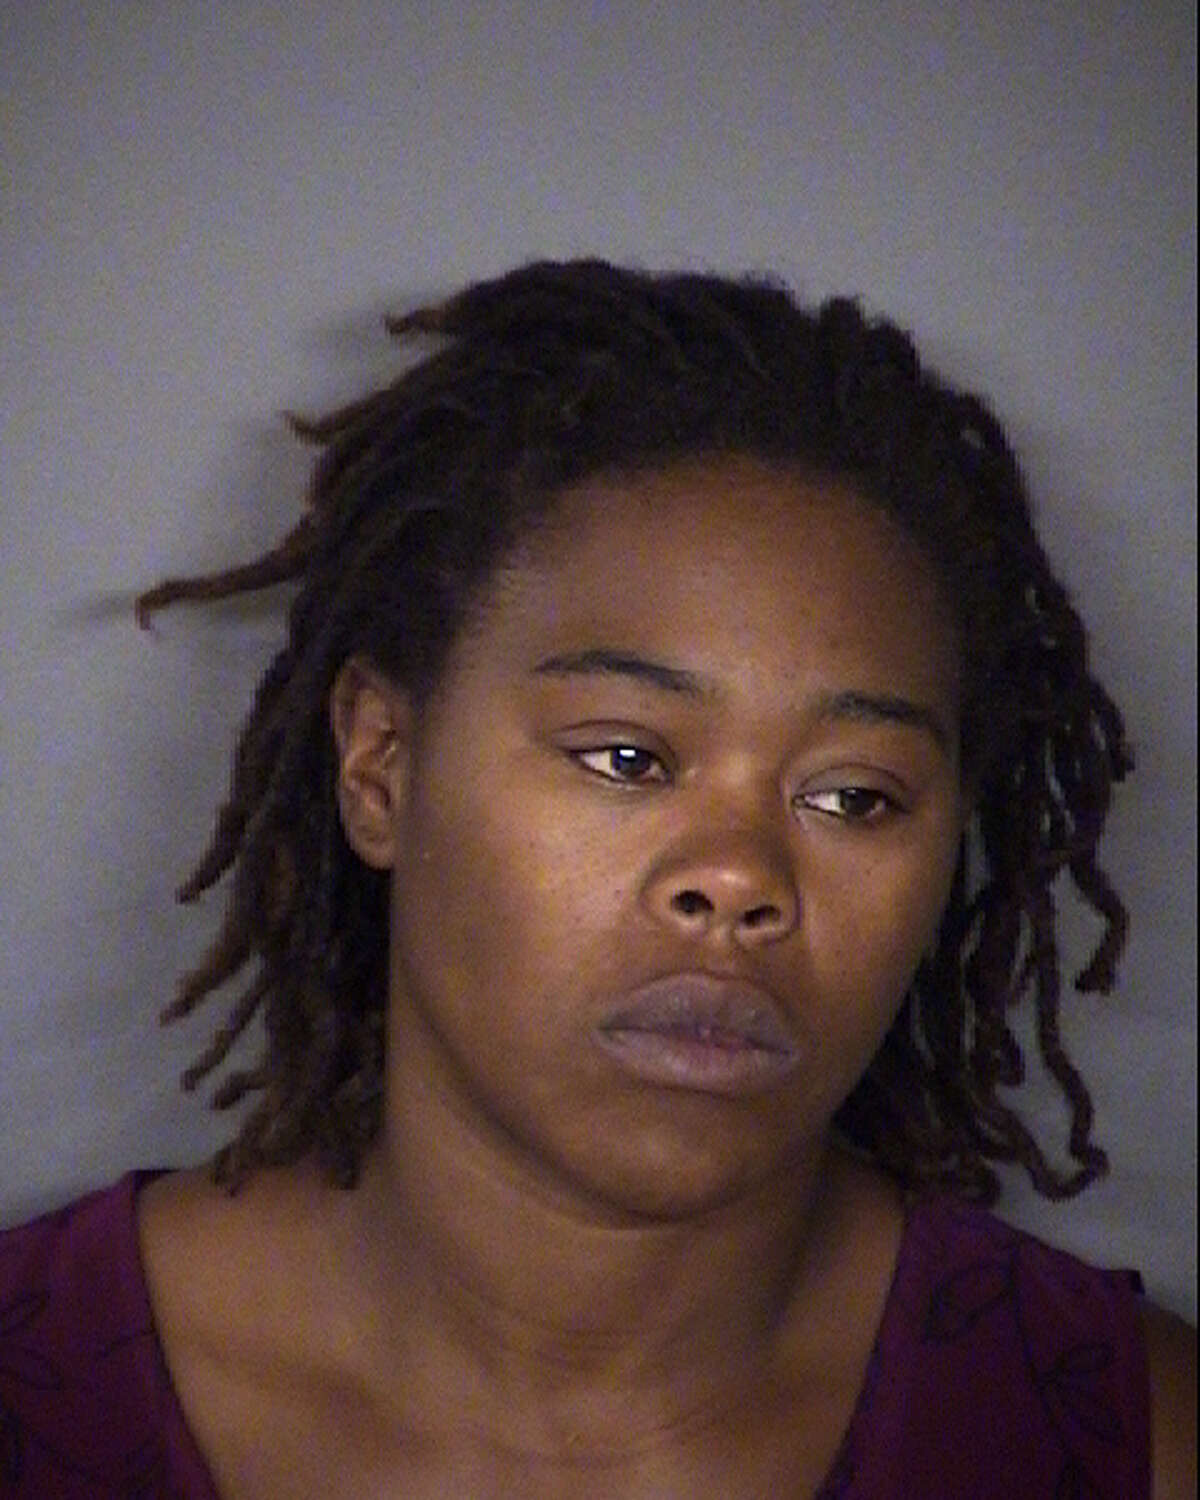 Cheryl Reed, 30, has been charged with two counts of injury to a child, according to the Bexar County Sheriff's Office